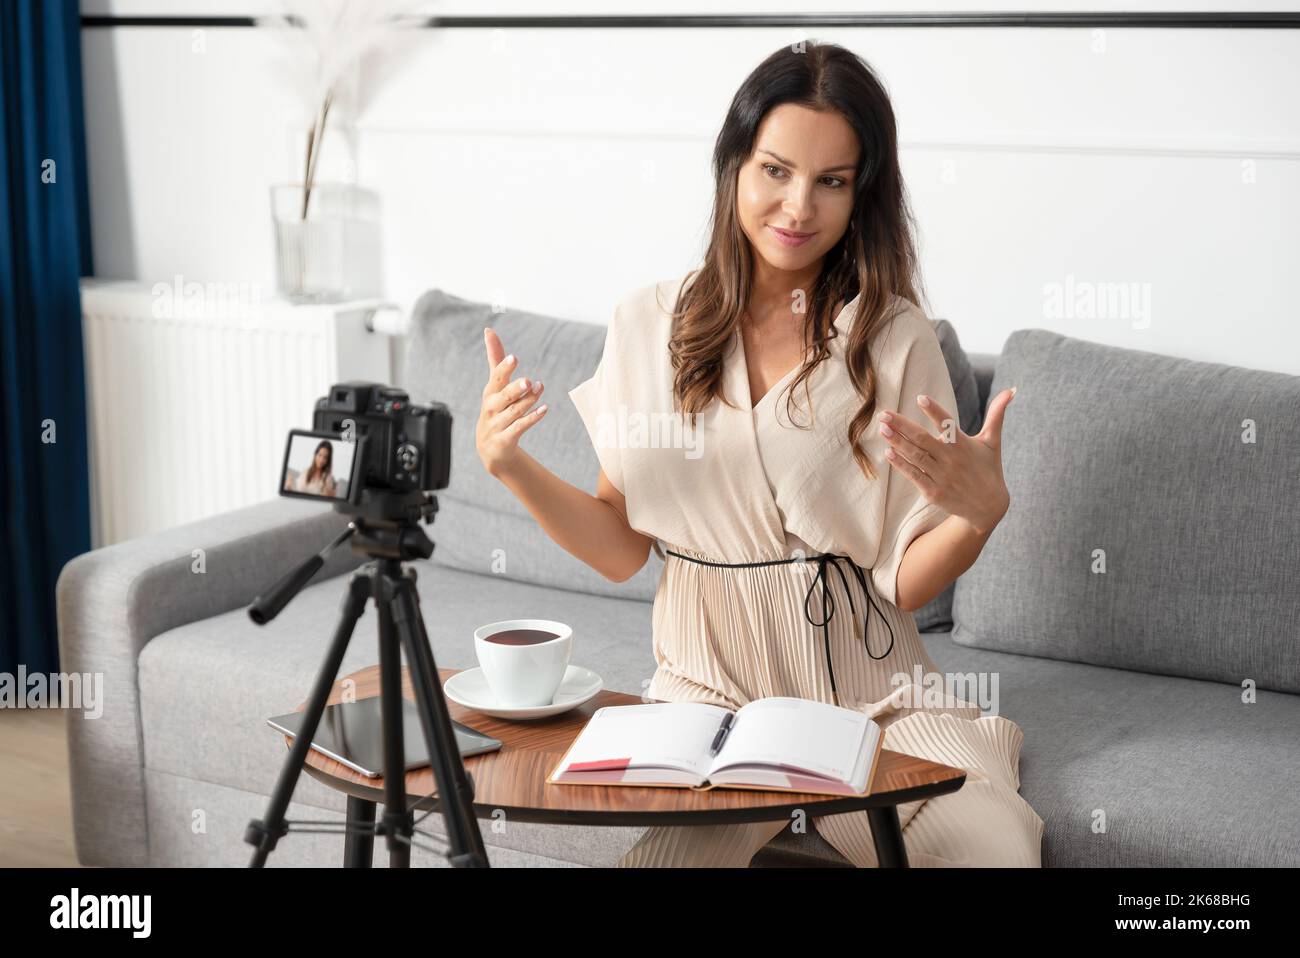 Young, beautiful woman broadcasting fashion tutorial. Internet content creator working from home Stock Photo